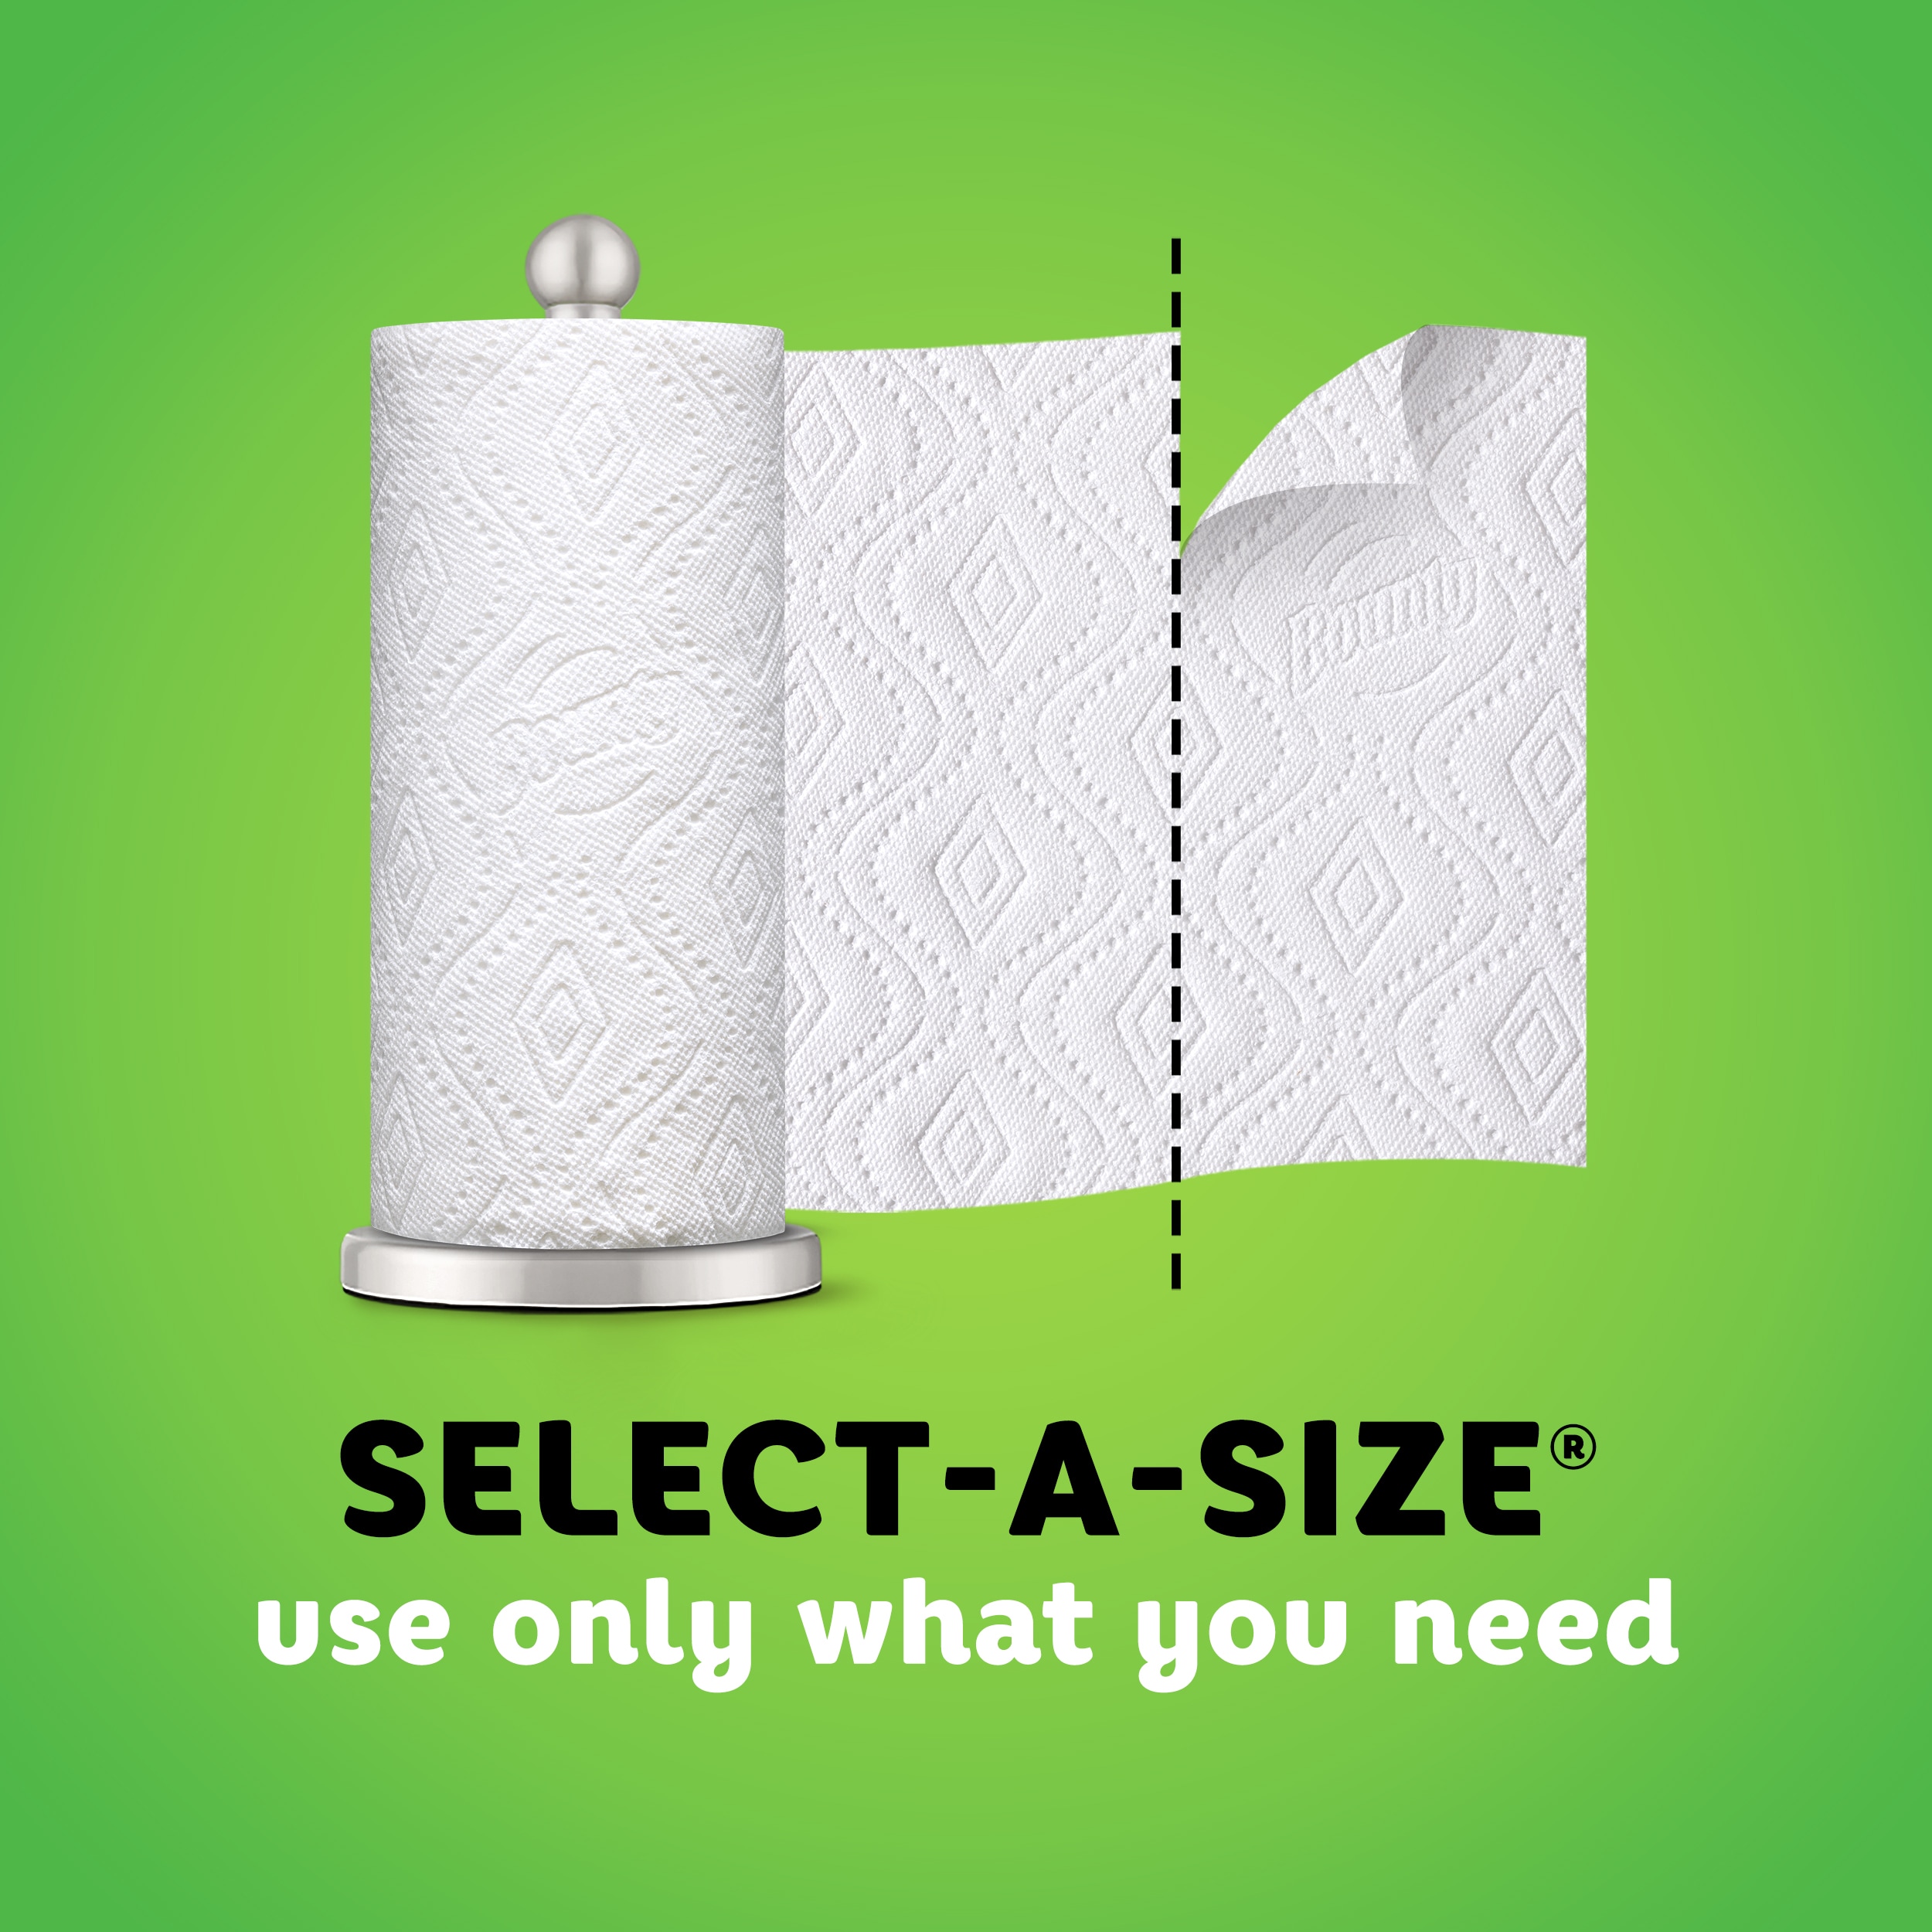 Make-a-size Paper Towels - 12 Double Rolls - Up & Up™ : Target